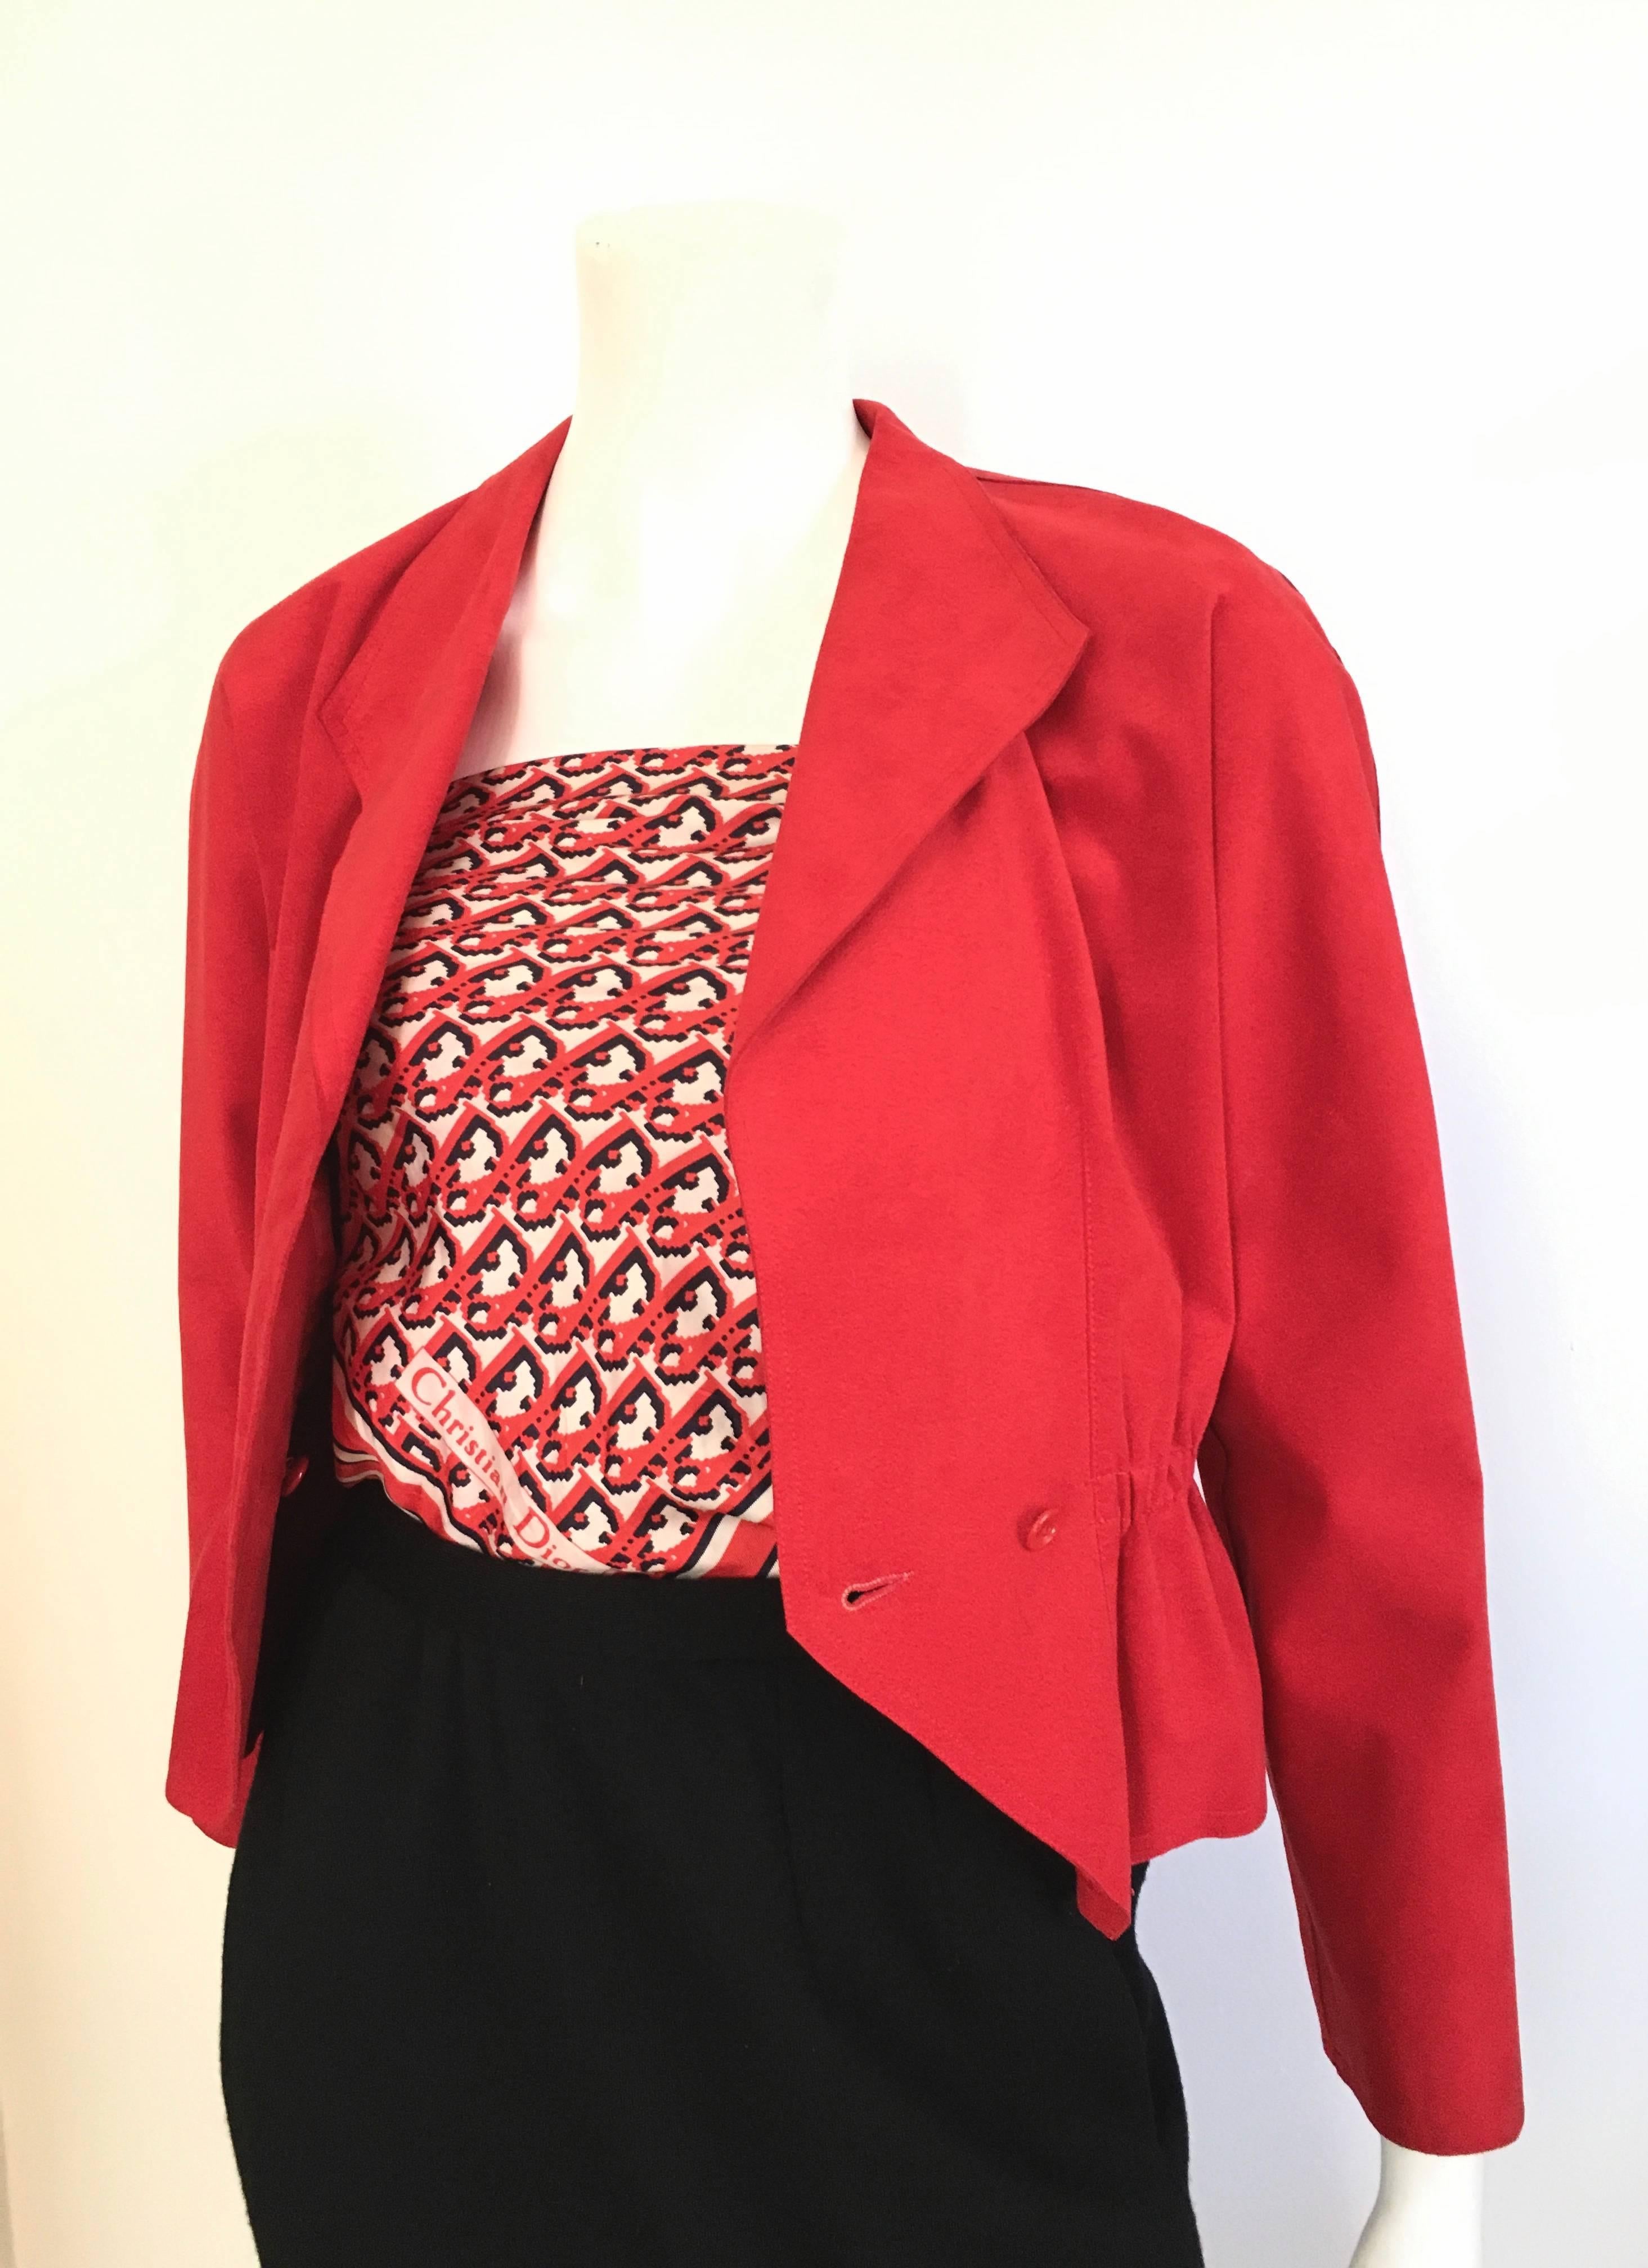 Halston 1970s Red Ultra Suede Peplum Jacket and Black Wool Pencil Skirt Size 4  For Sale 1